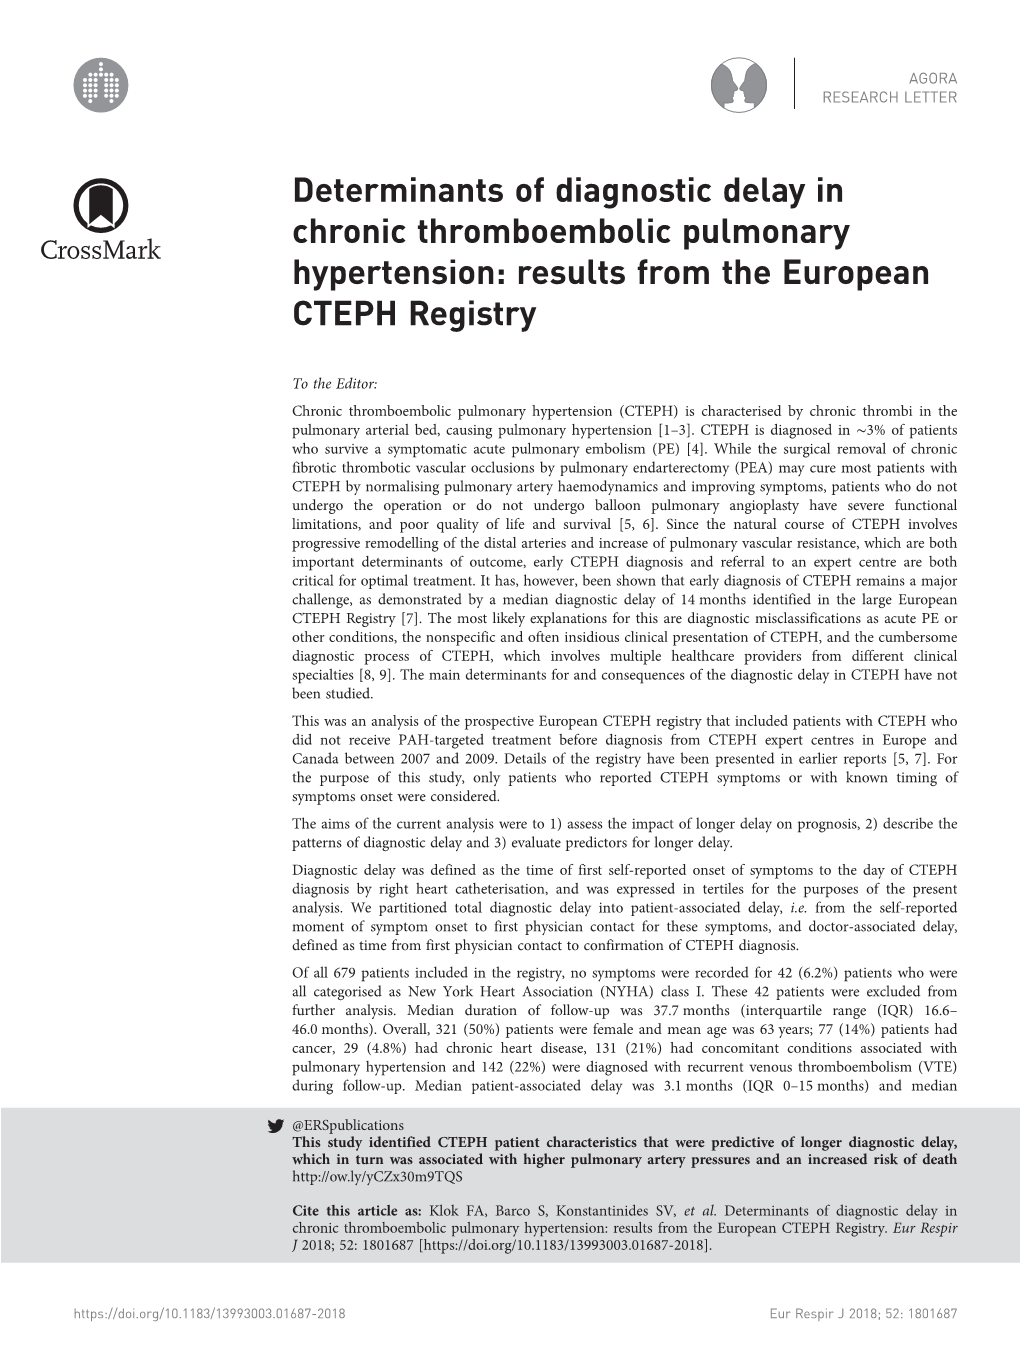 Determinants of Diagnostic Delay in Chronic Thromboembolic Pulmonary Hypertension: Results from the European CTEPH Registry